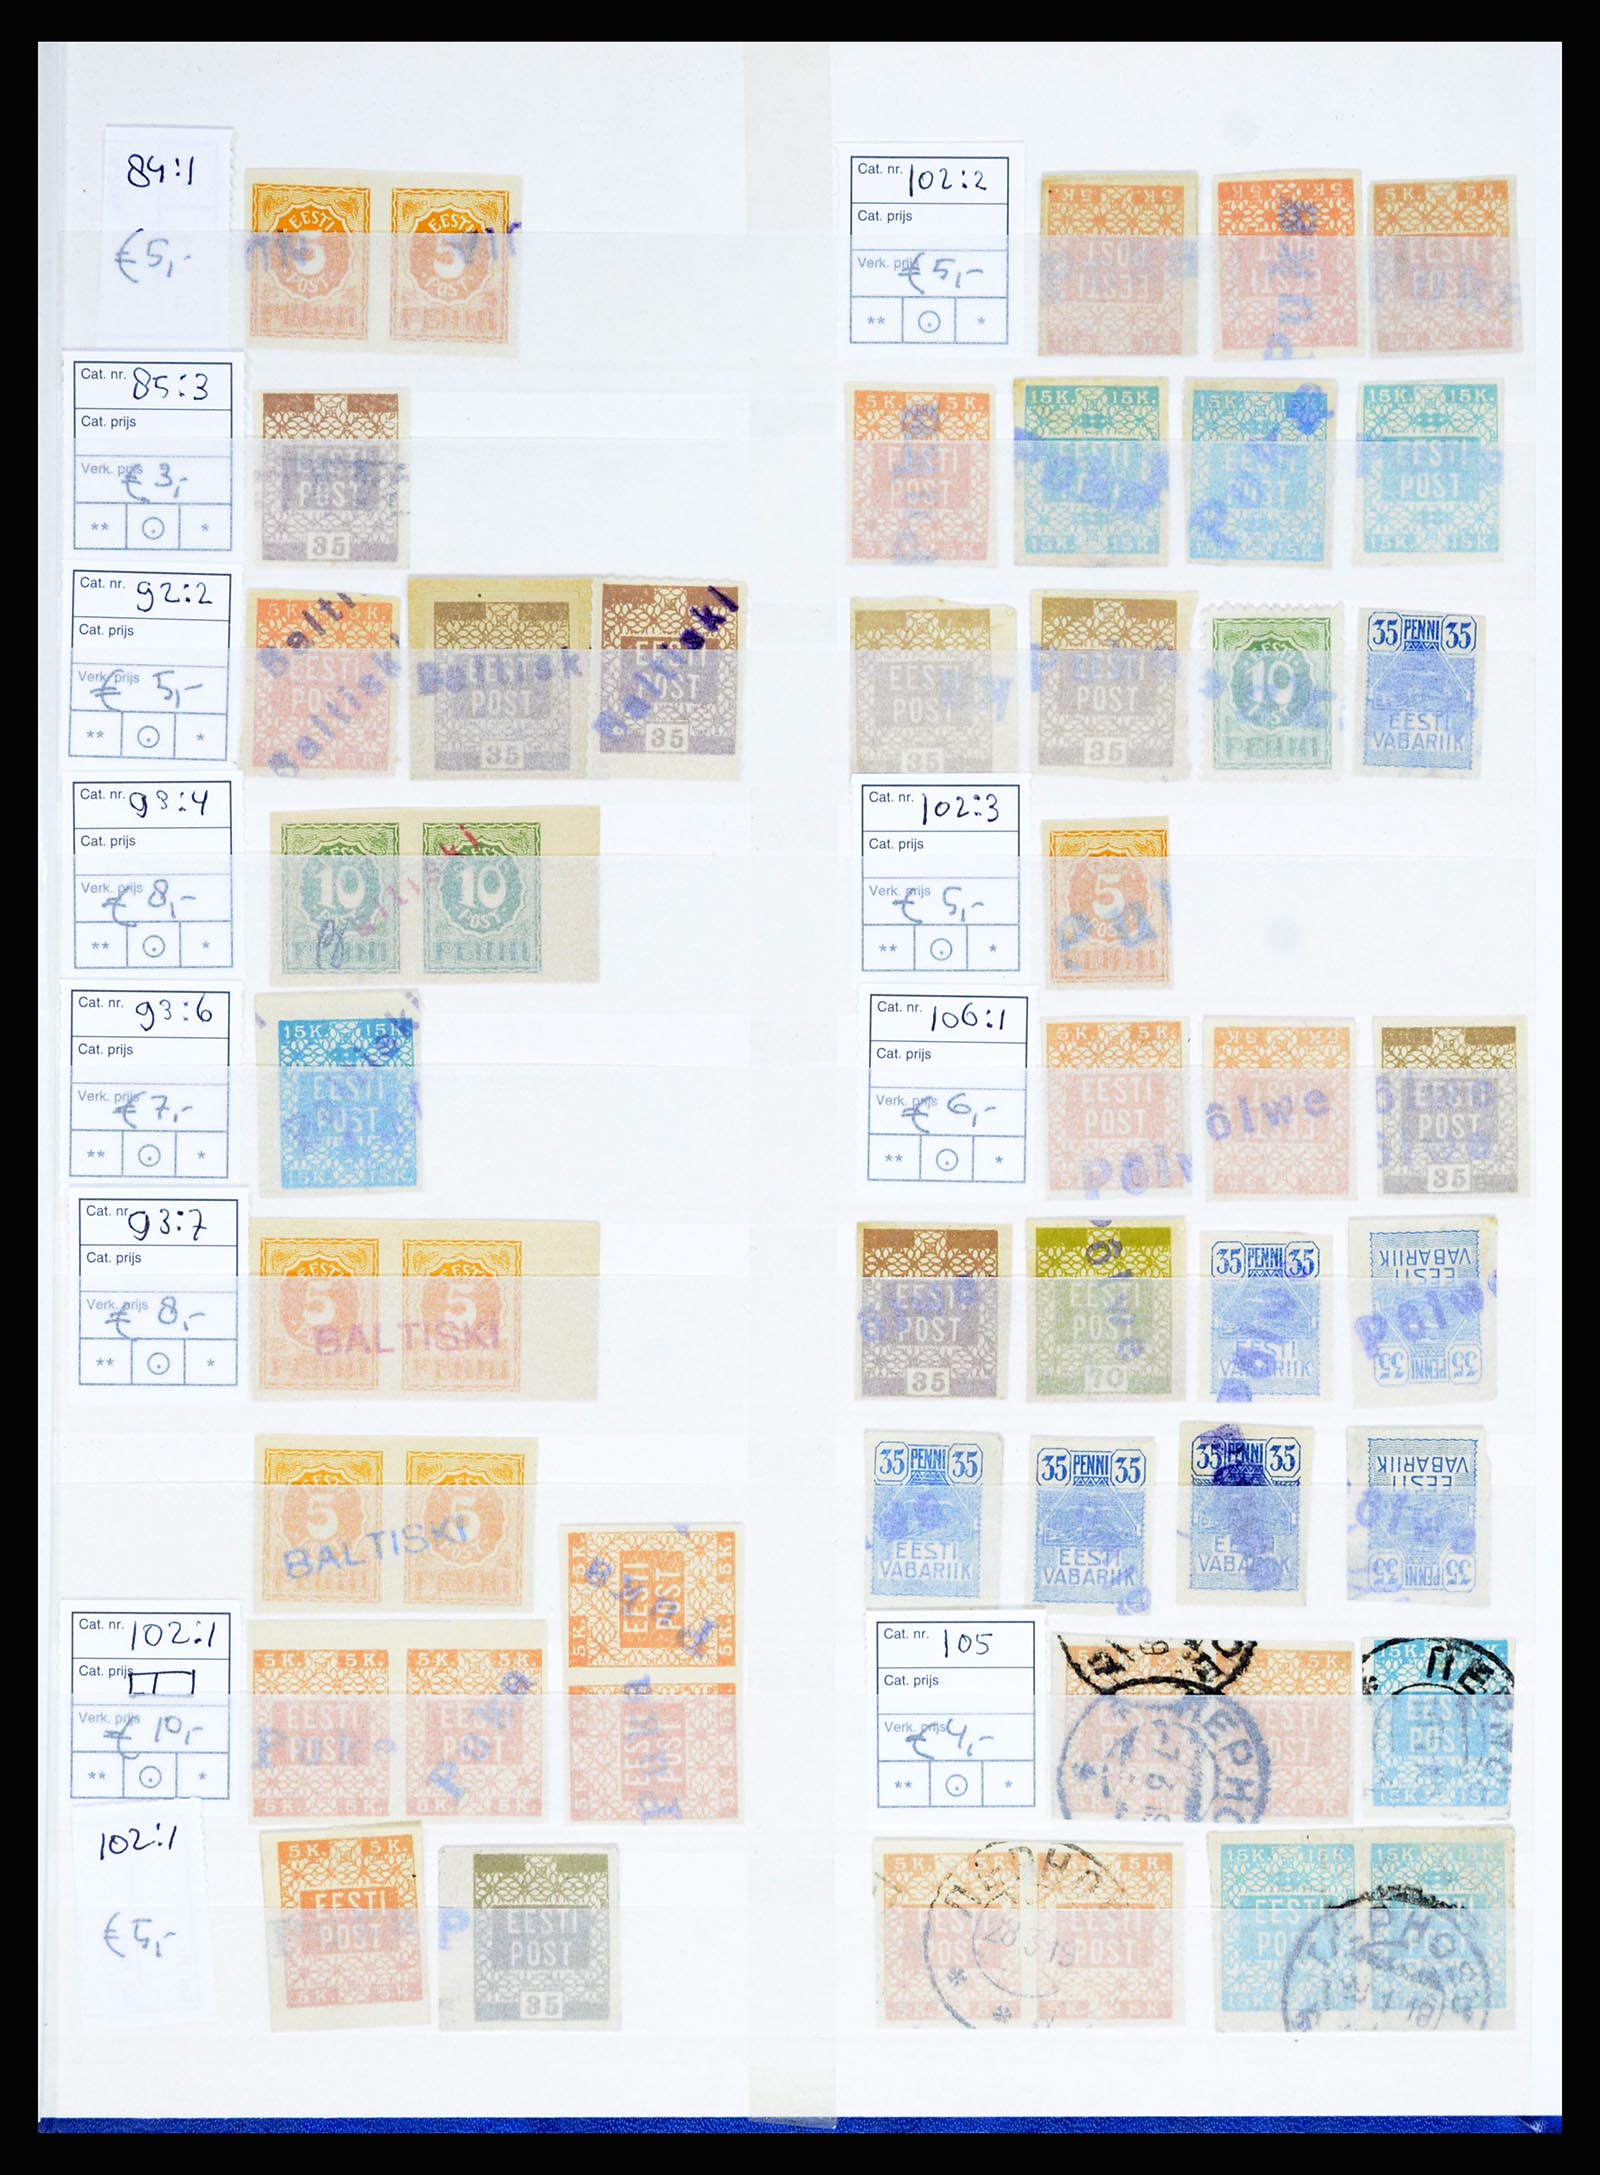 36922 010 - Stamp collection 36922 Estonia cancels 1918-1920.